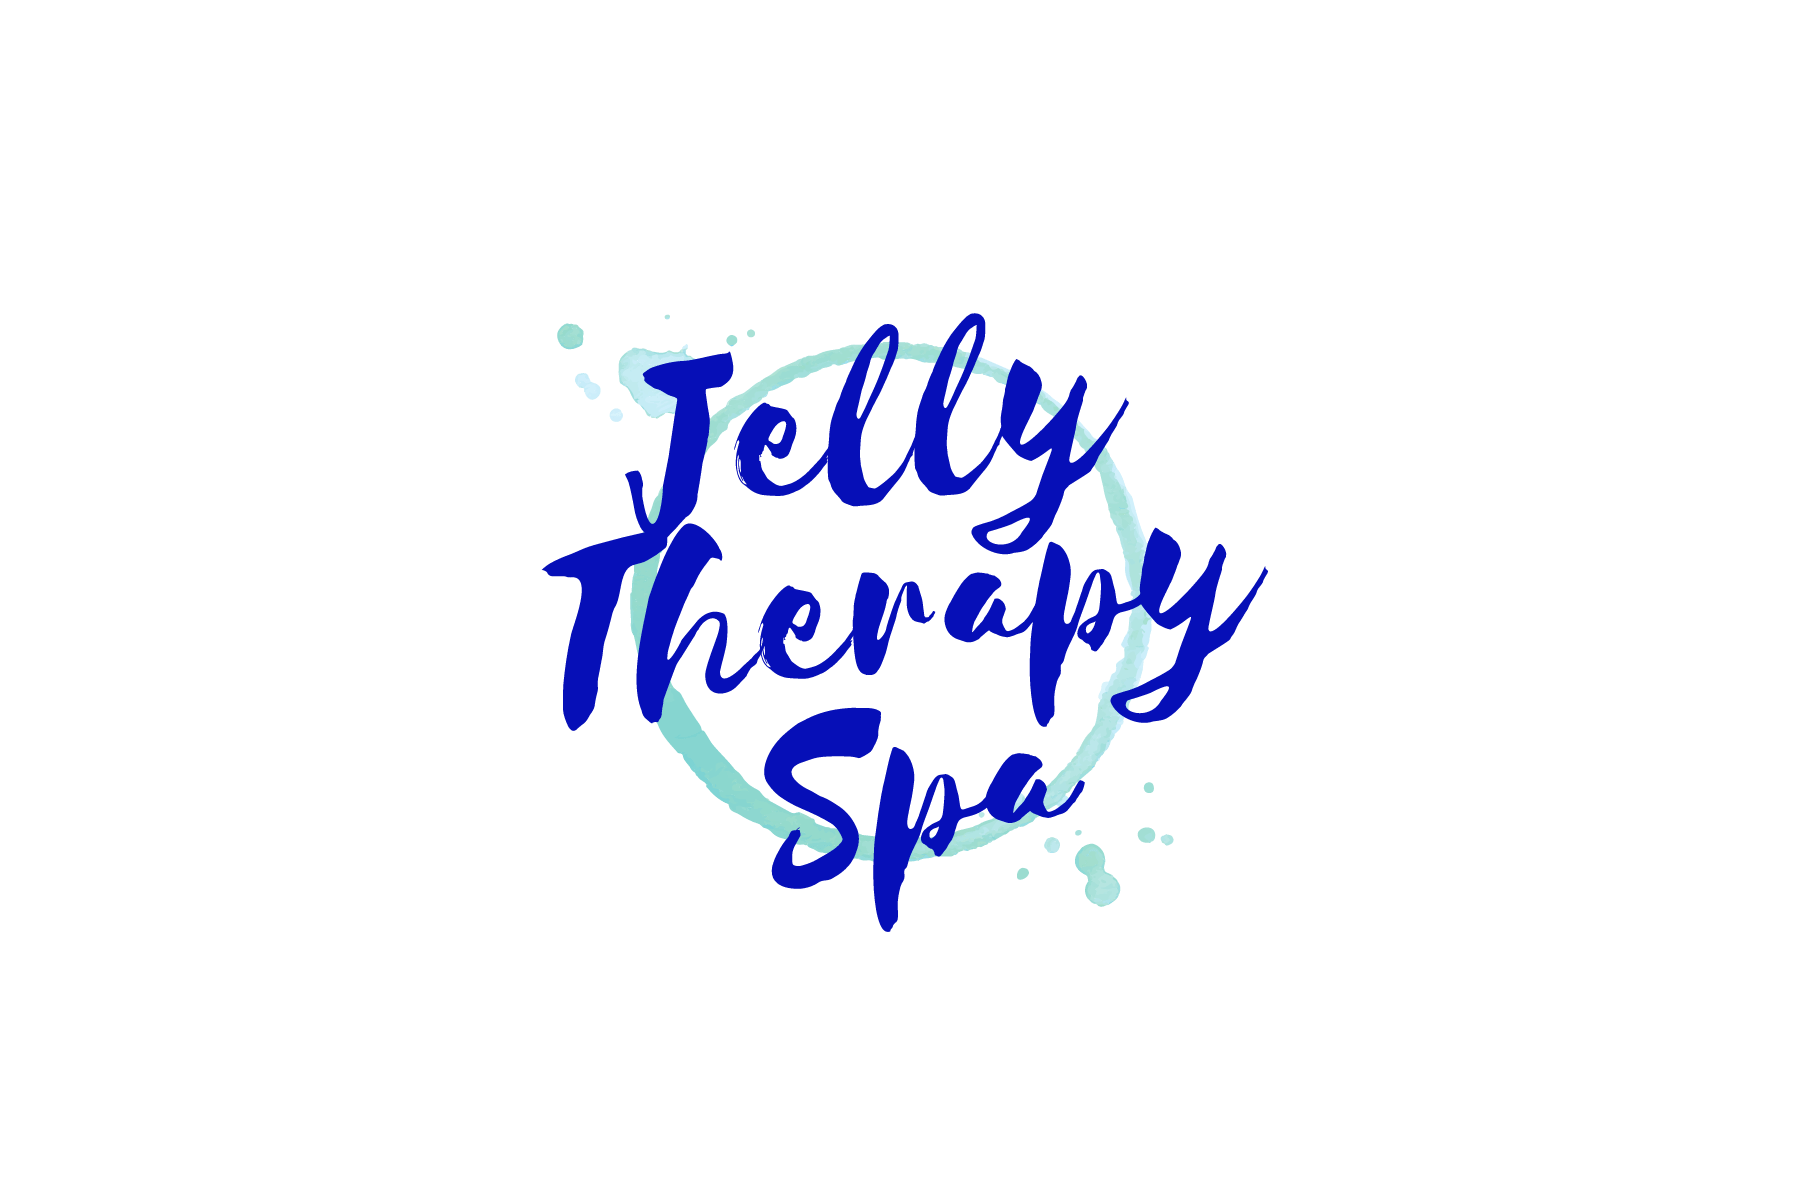 Jelly Therapy Spa 